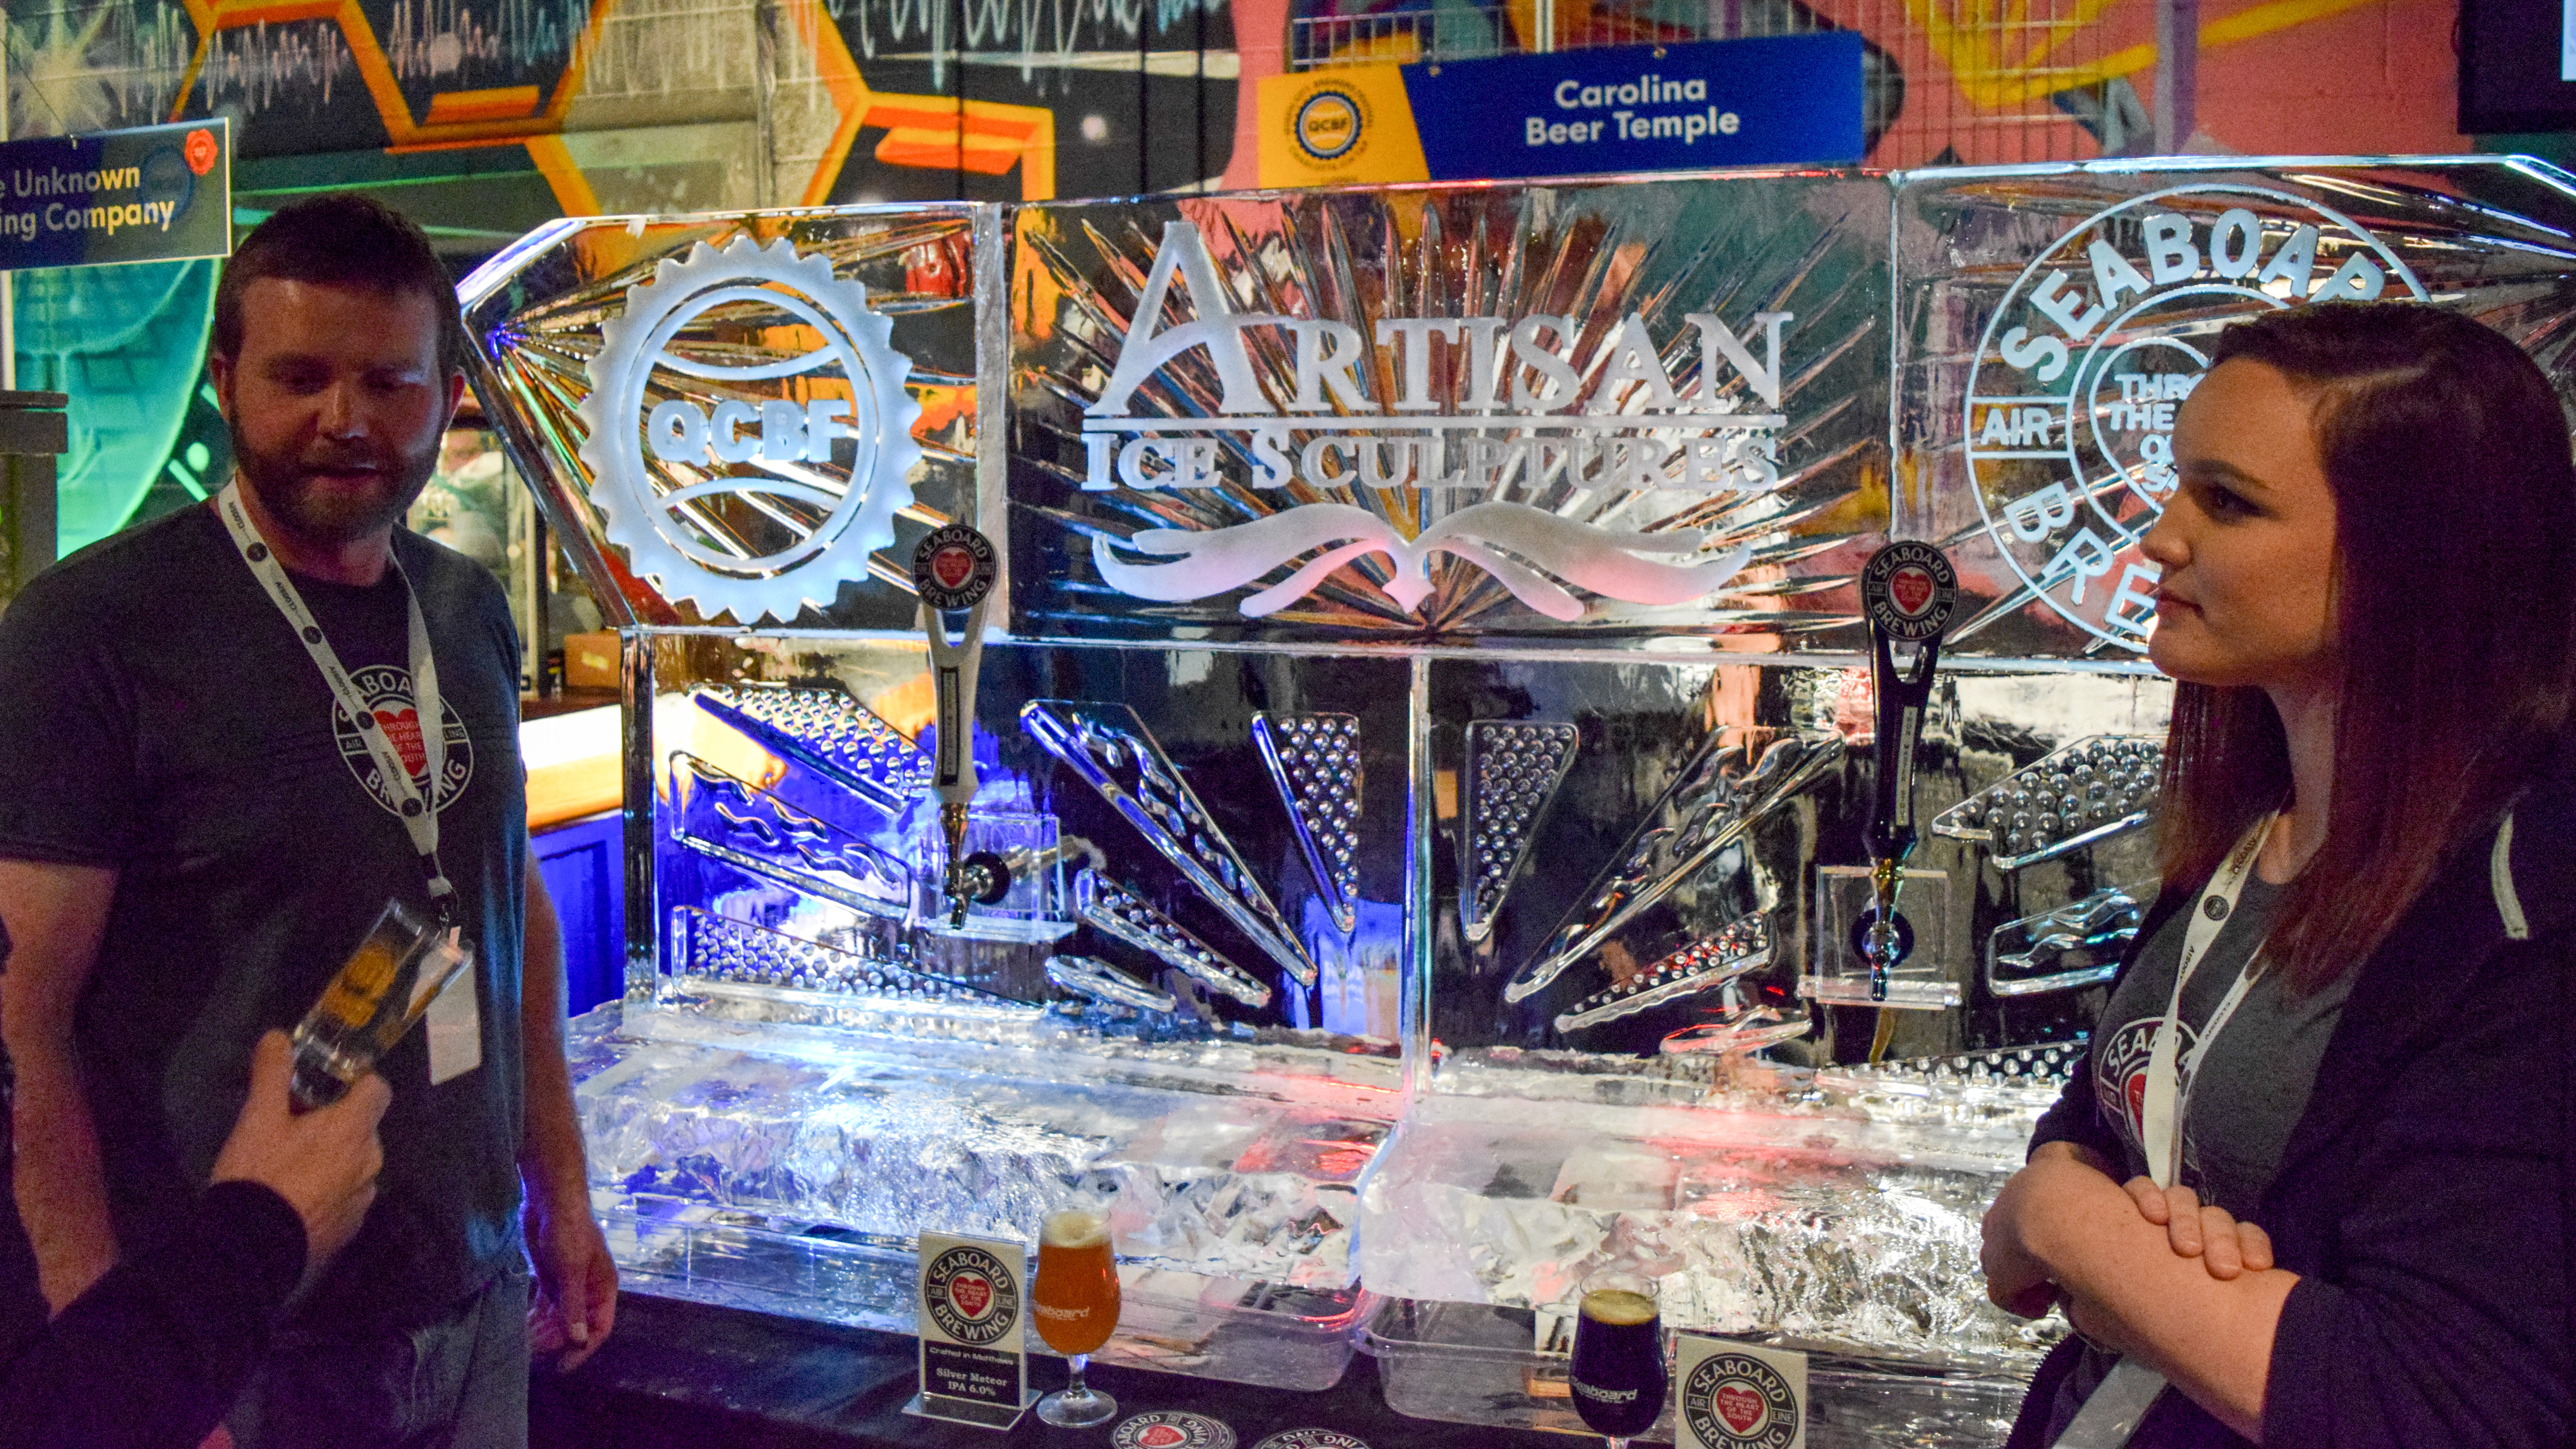 Ice sculpture with Carolina Beer Temple